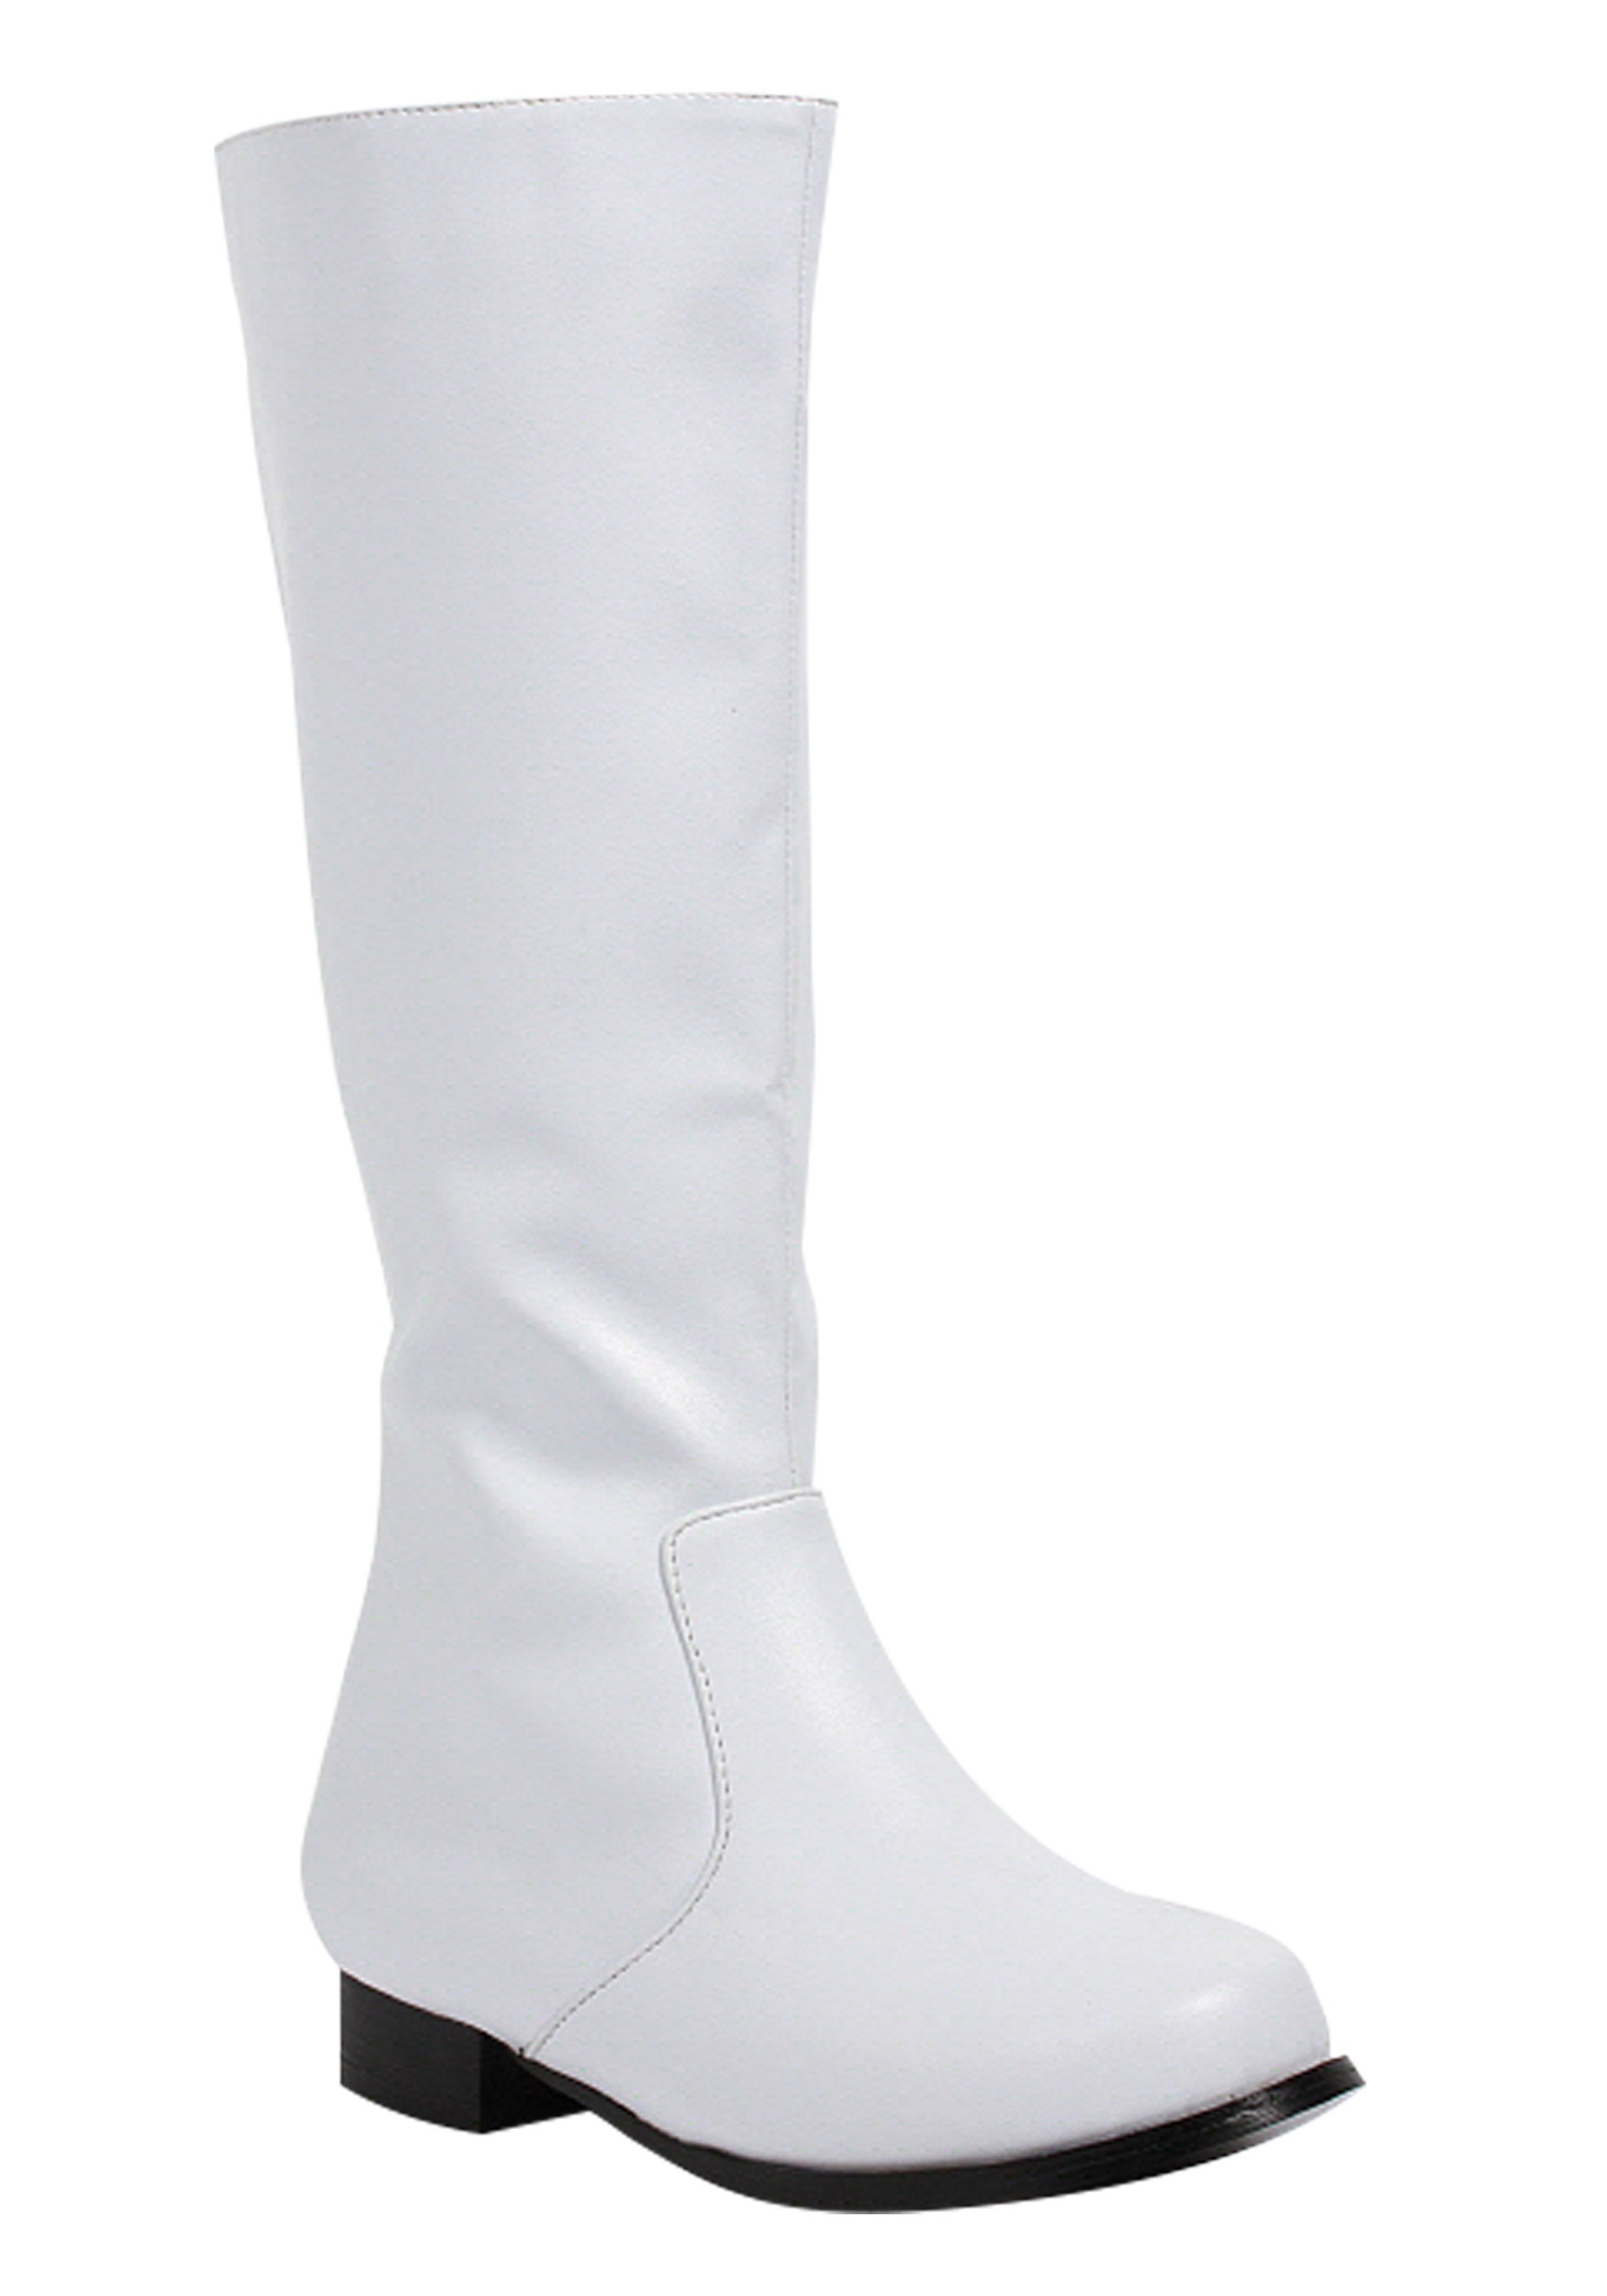 white boots for toddlers